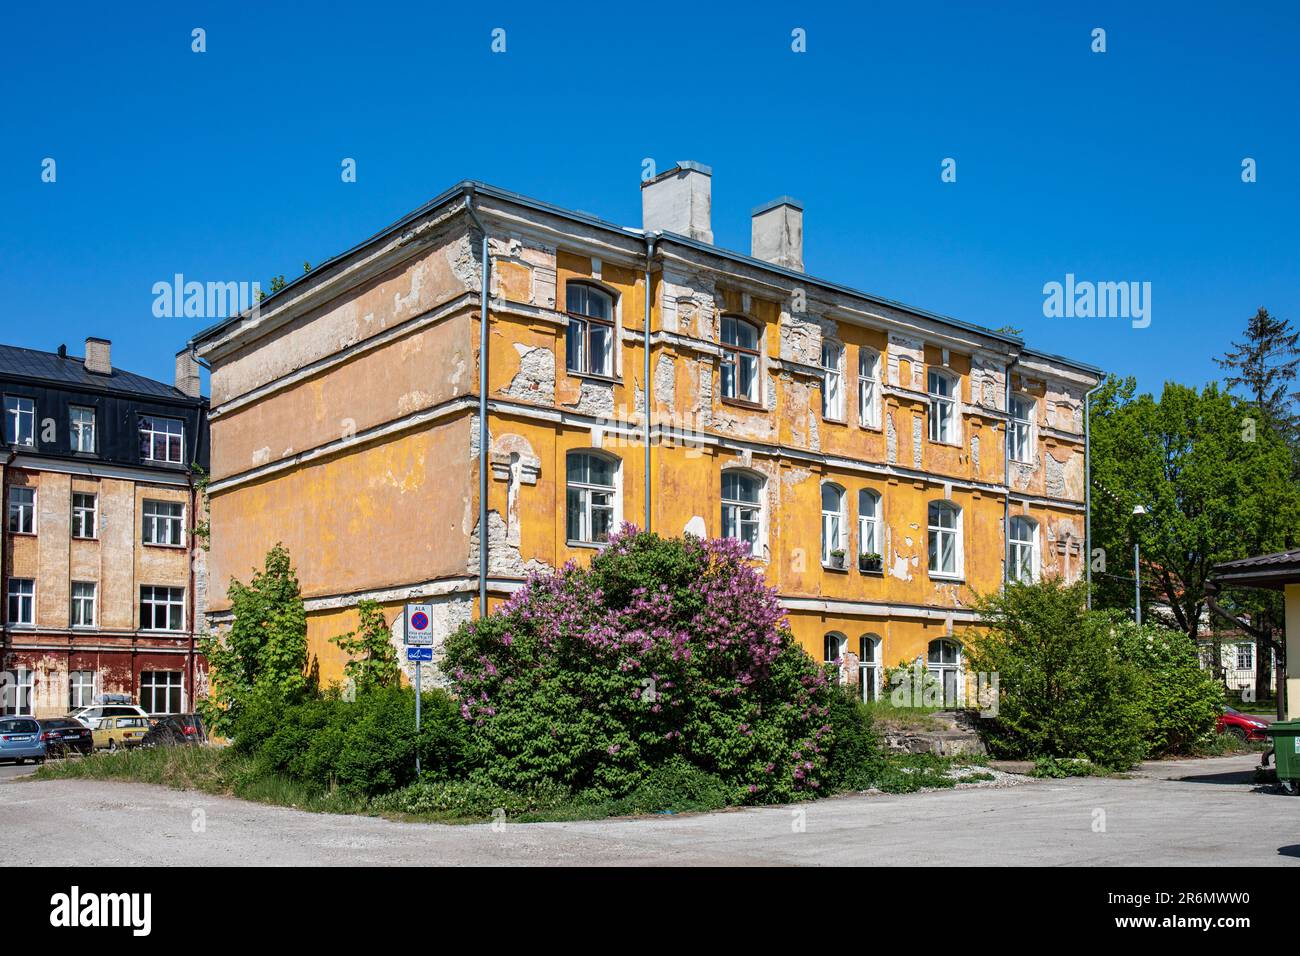 Derelict looking residential building against clear blue sky on a sunny day at Kopli 75 in Kopli district of Tallinn, Estonia Stock Photo